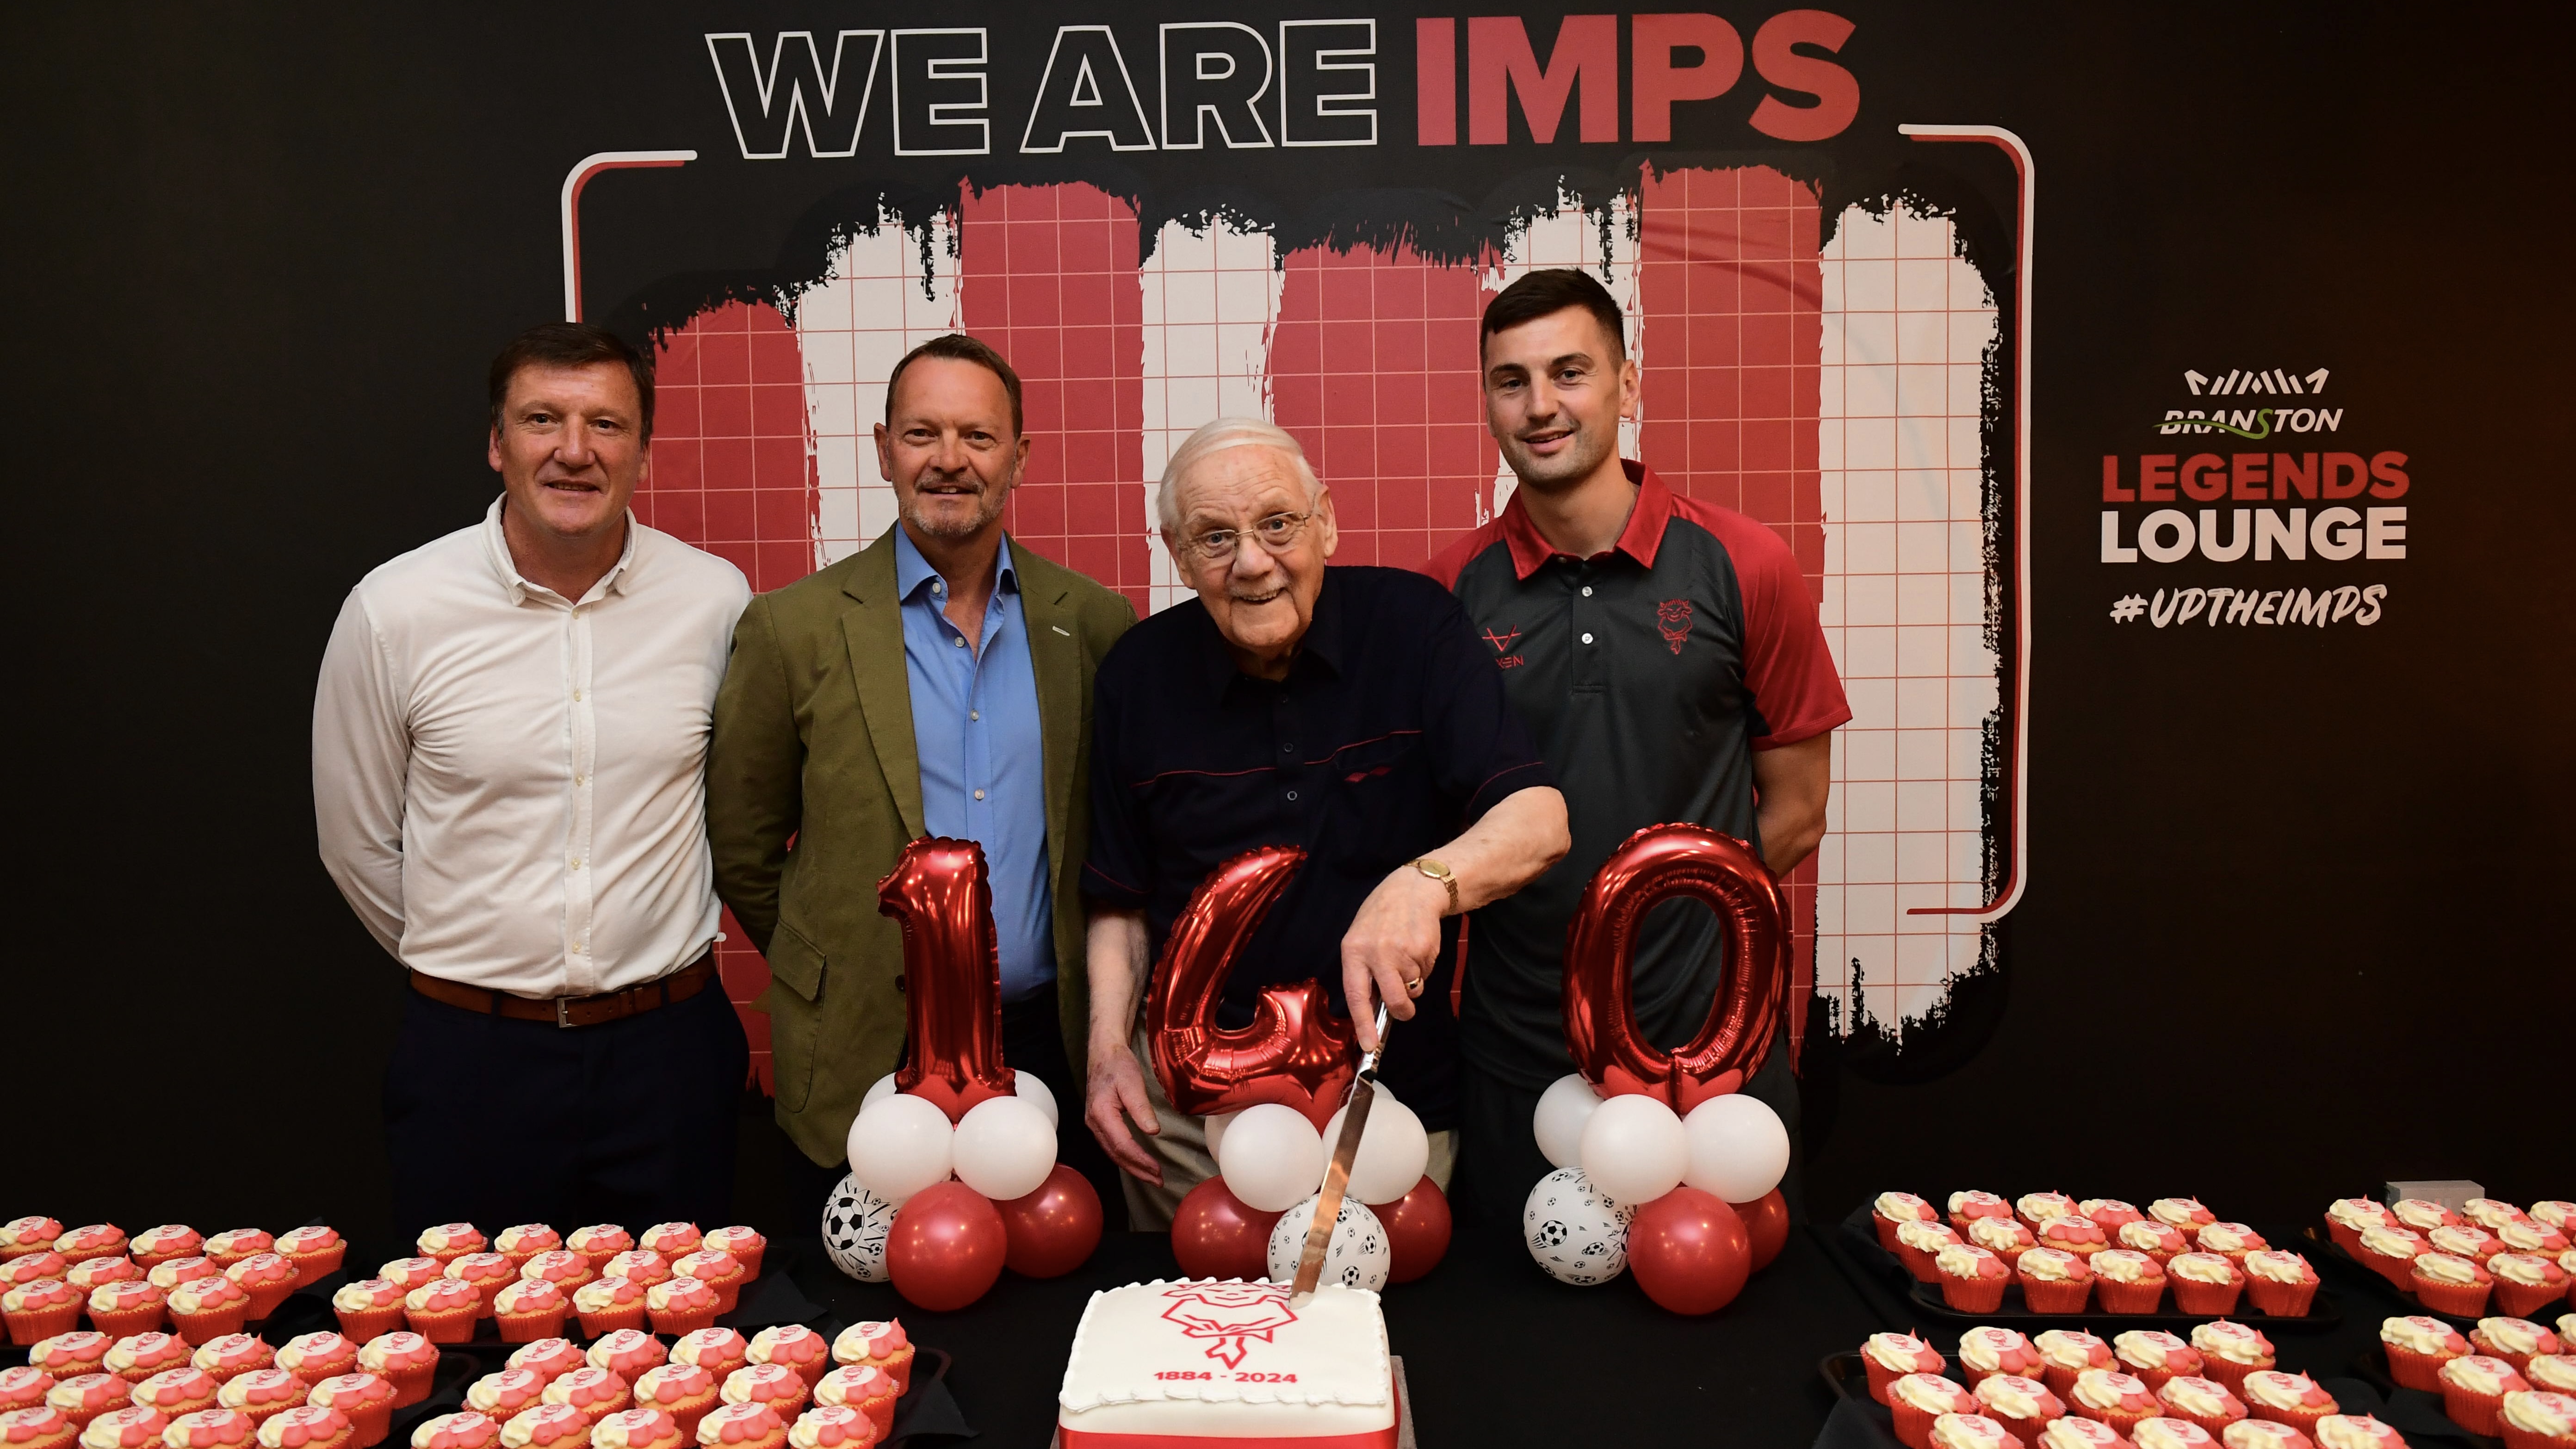 Cutting the cake at the 140th birthday